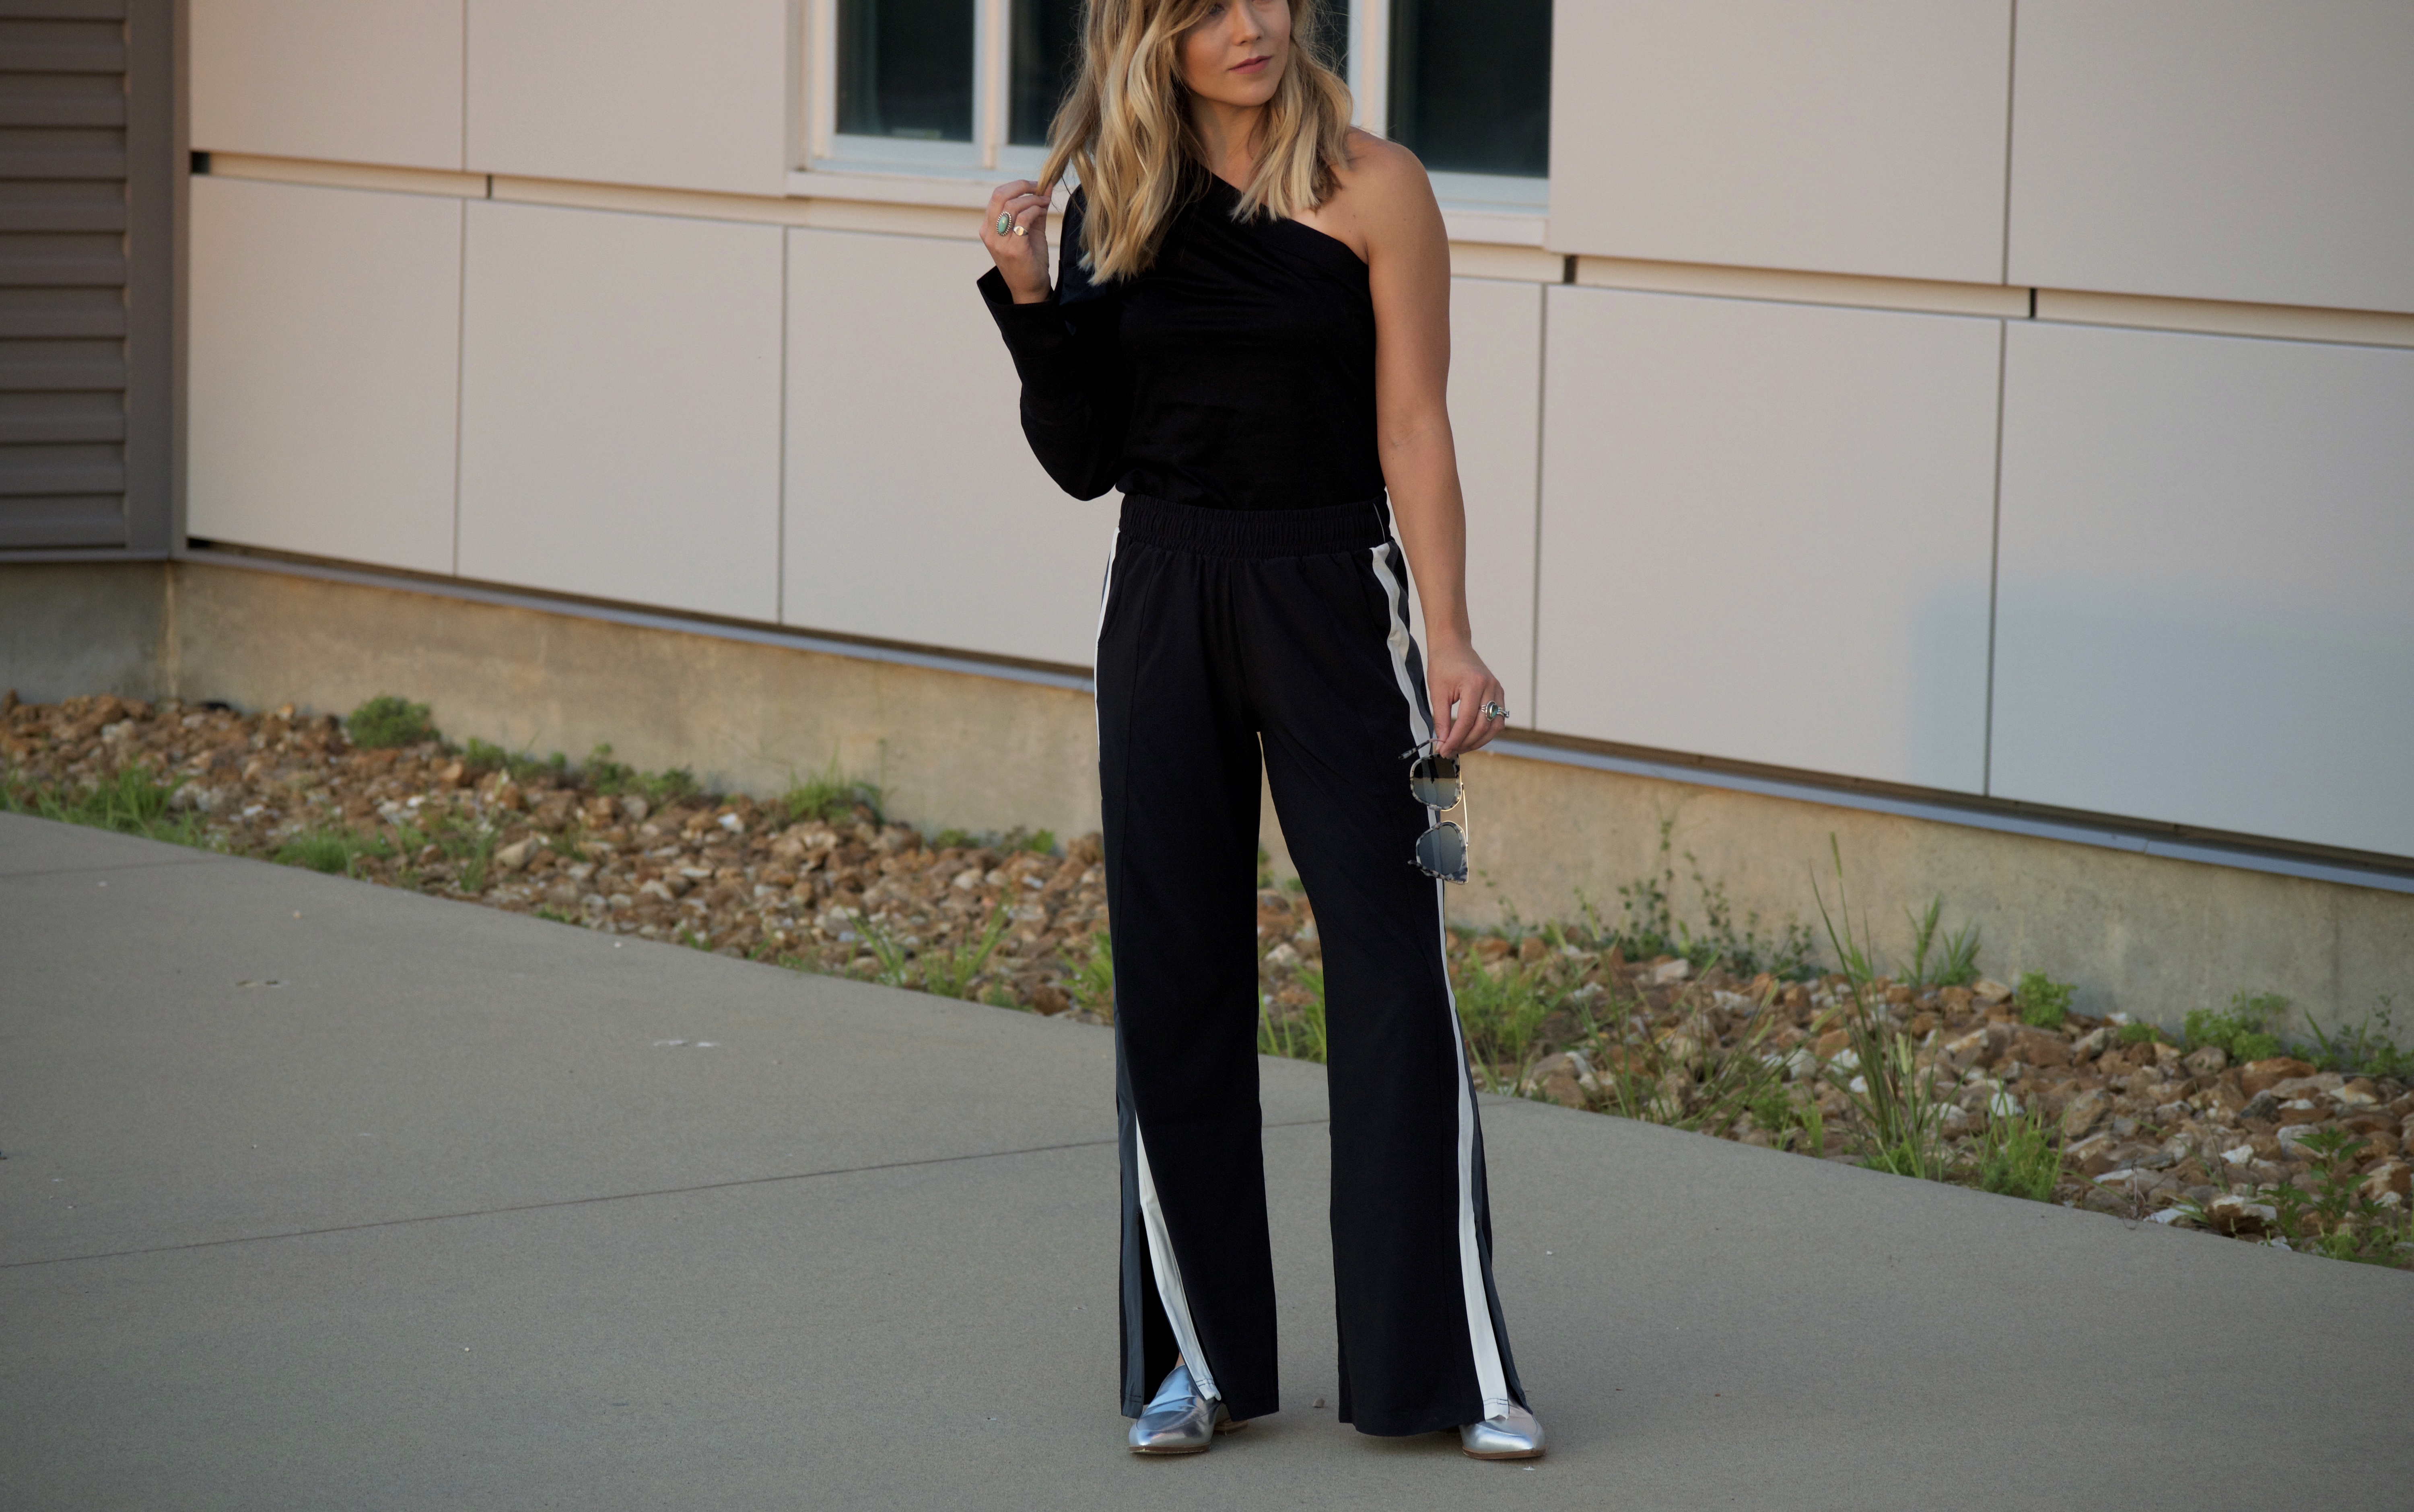 How-to Style Track Pants